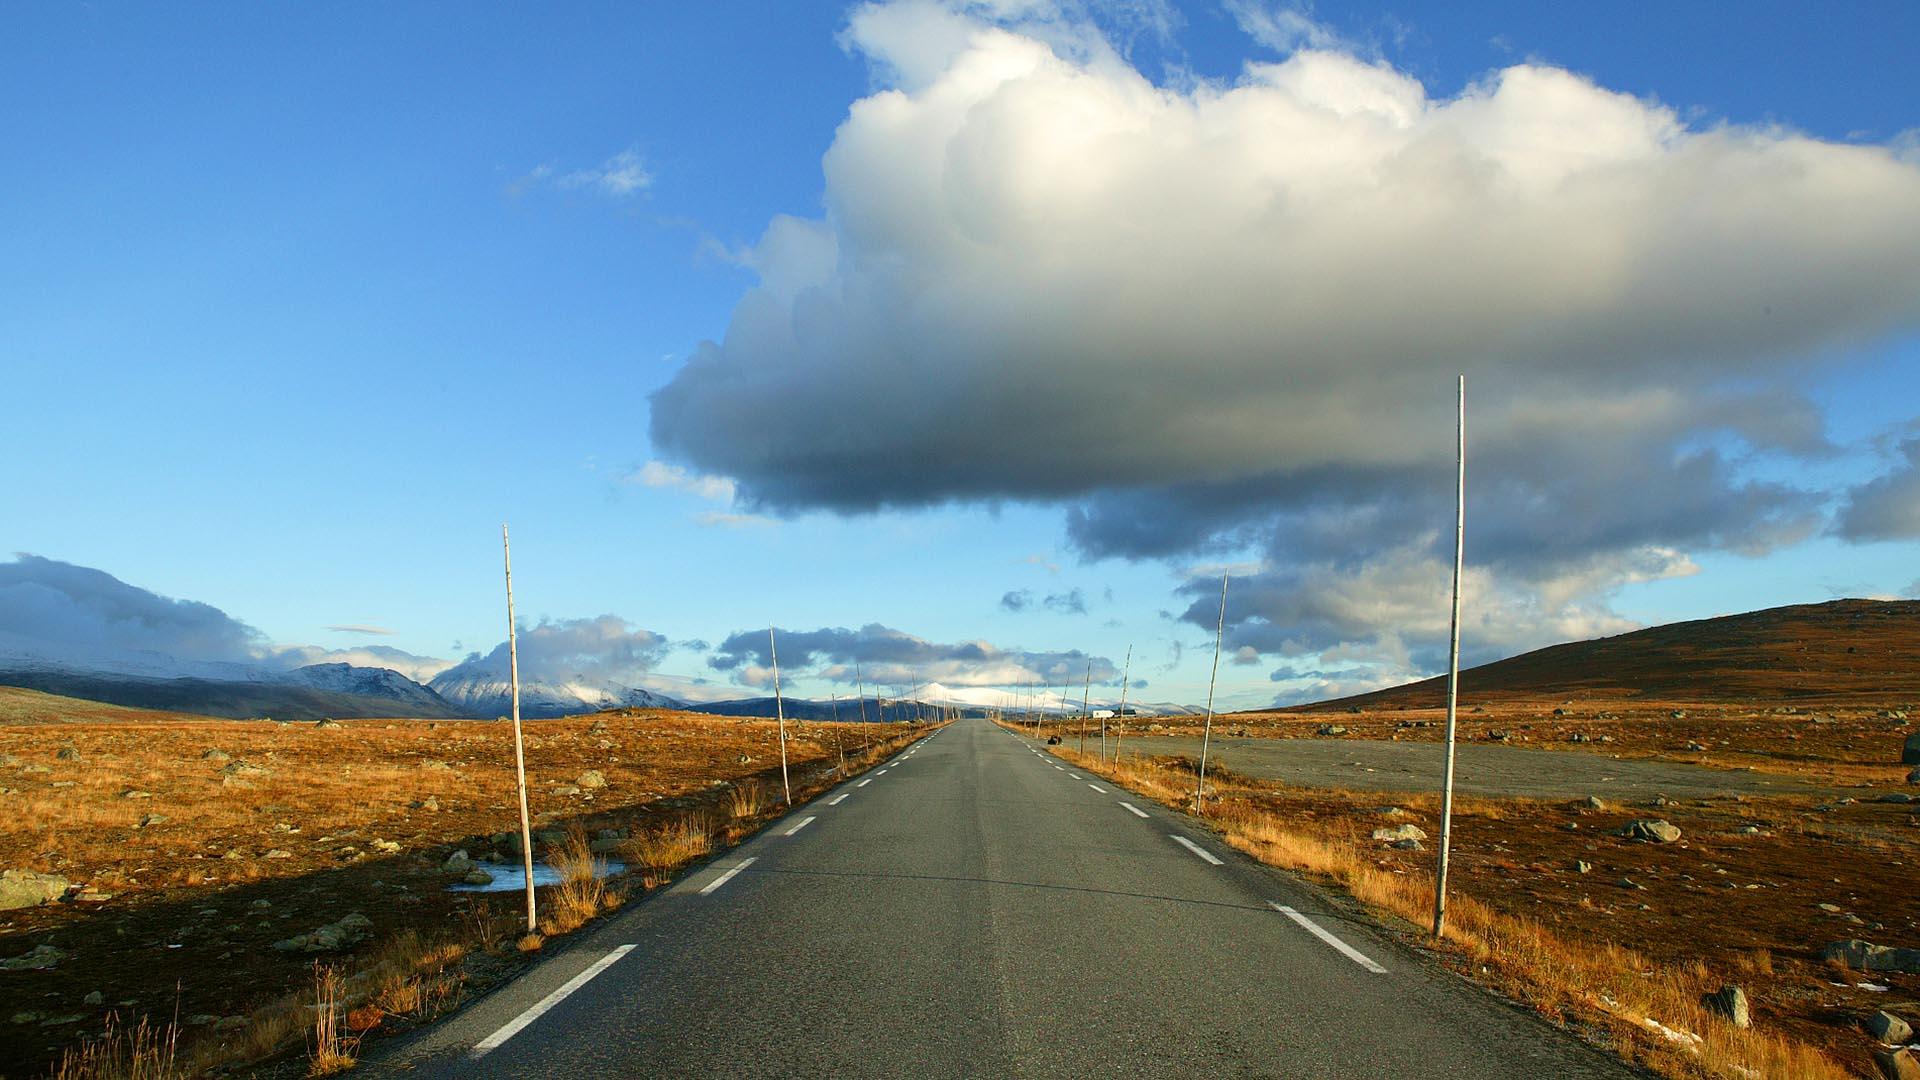 The road over Valdresflye in the middle with its characteristic tall plough poles.